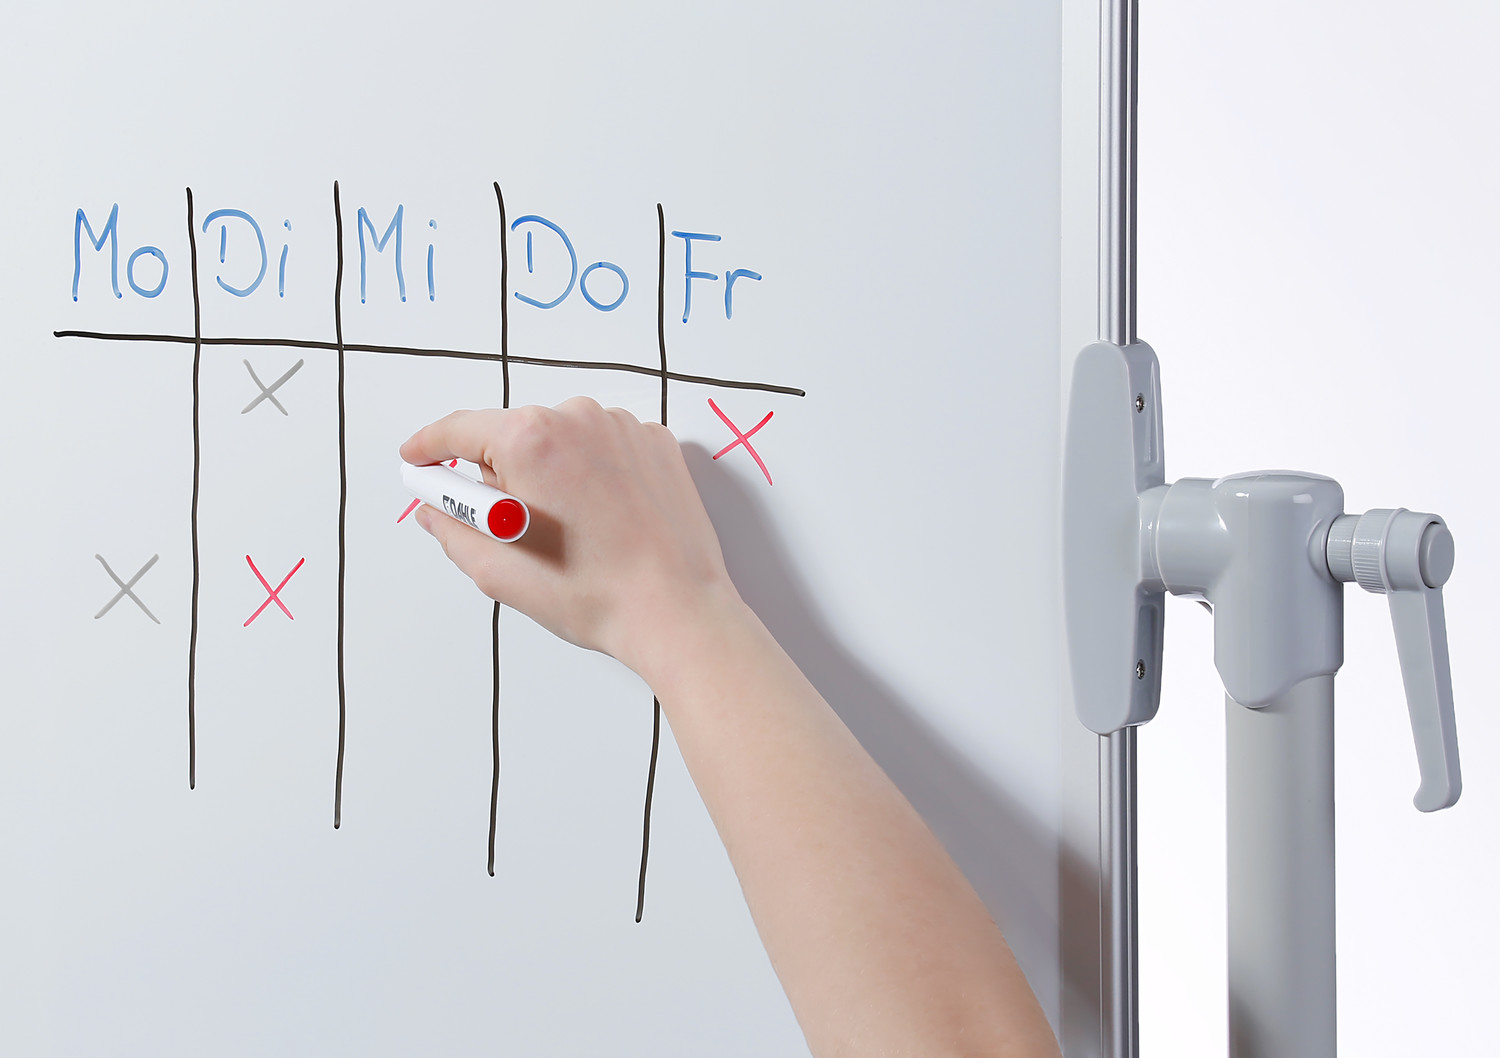 White, magnetic surface for writing with dry-erase whiteboard markers